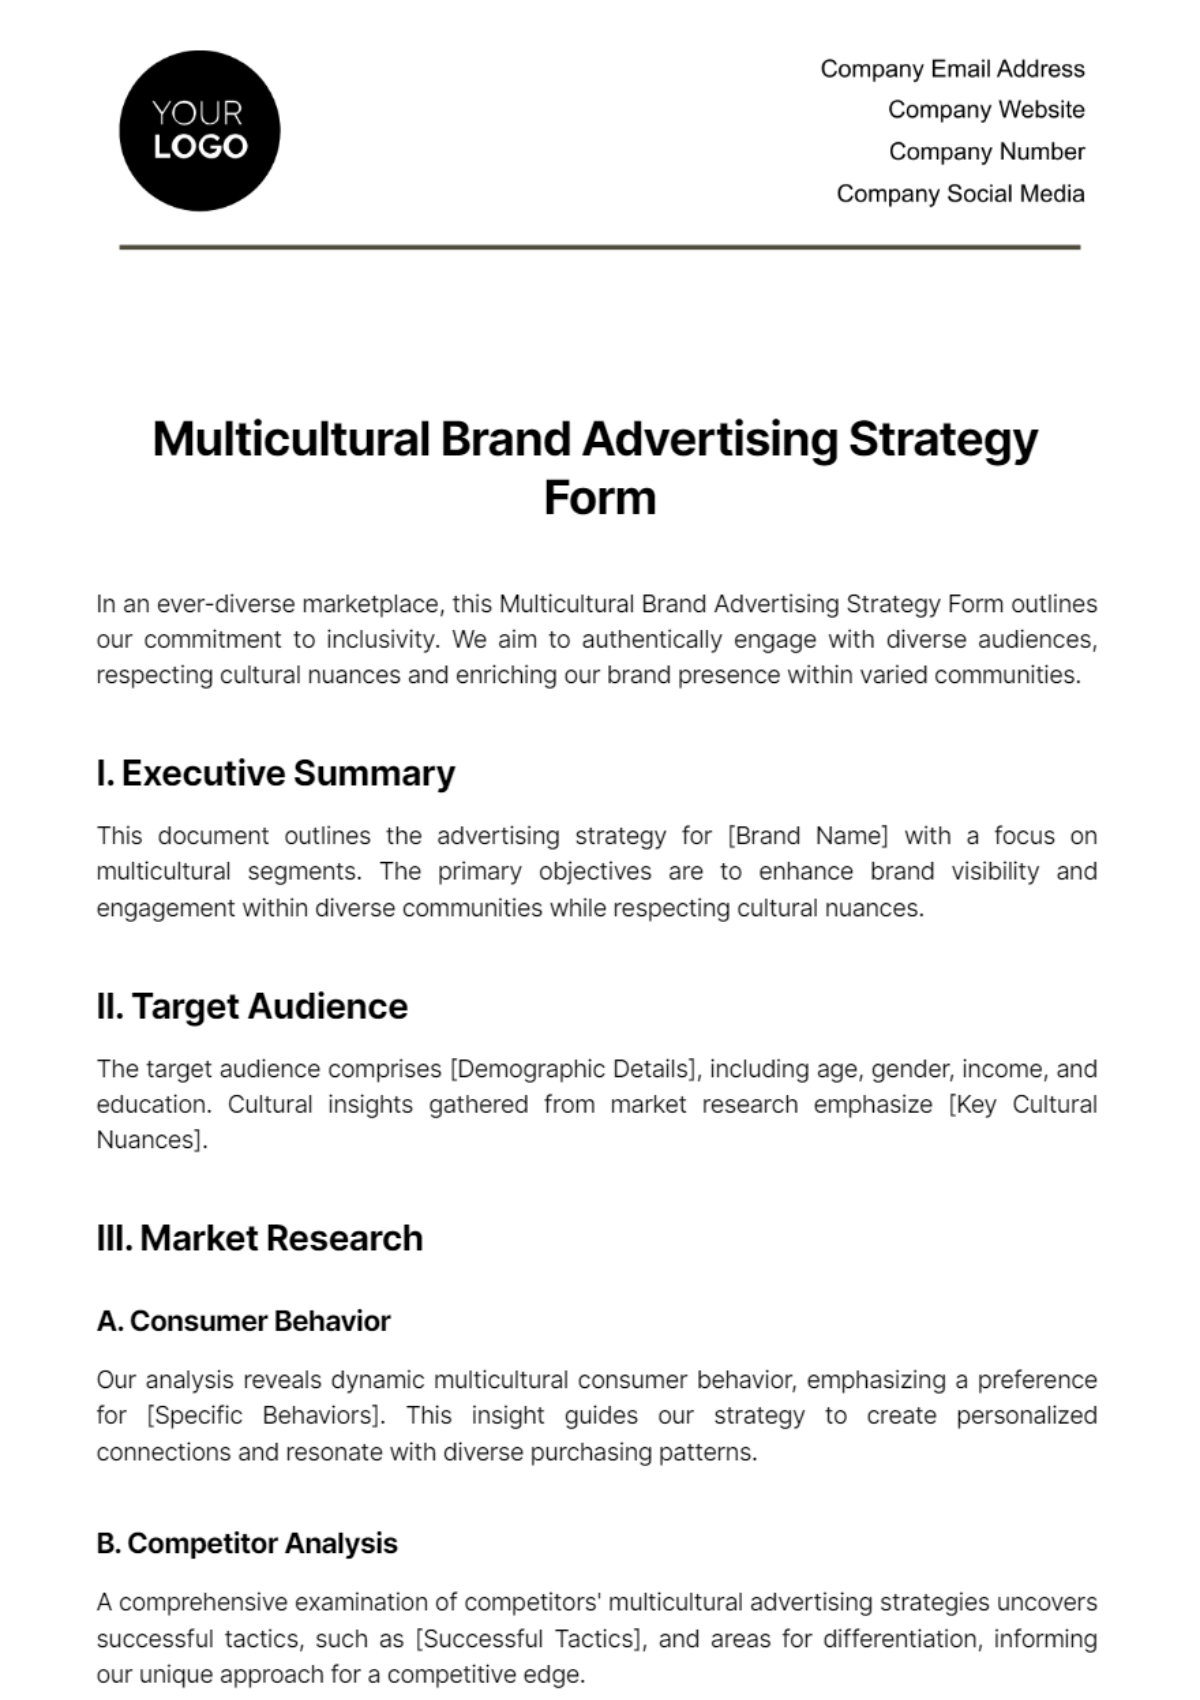 Free Multicultural Brand Advertising Strategy Form Template